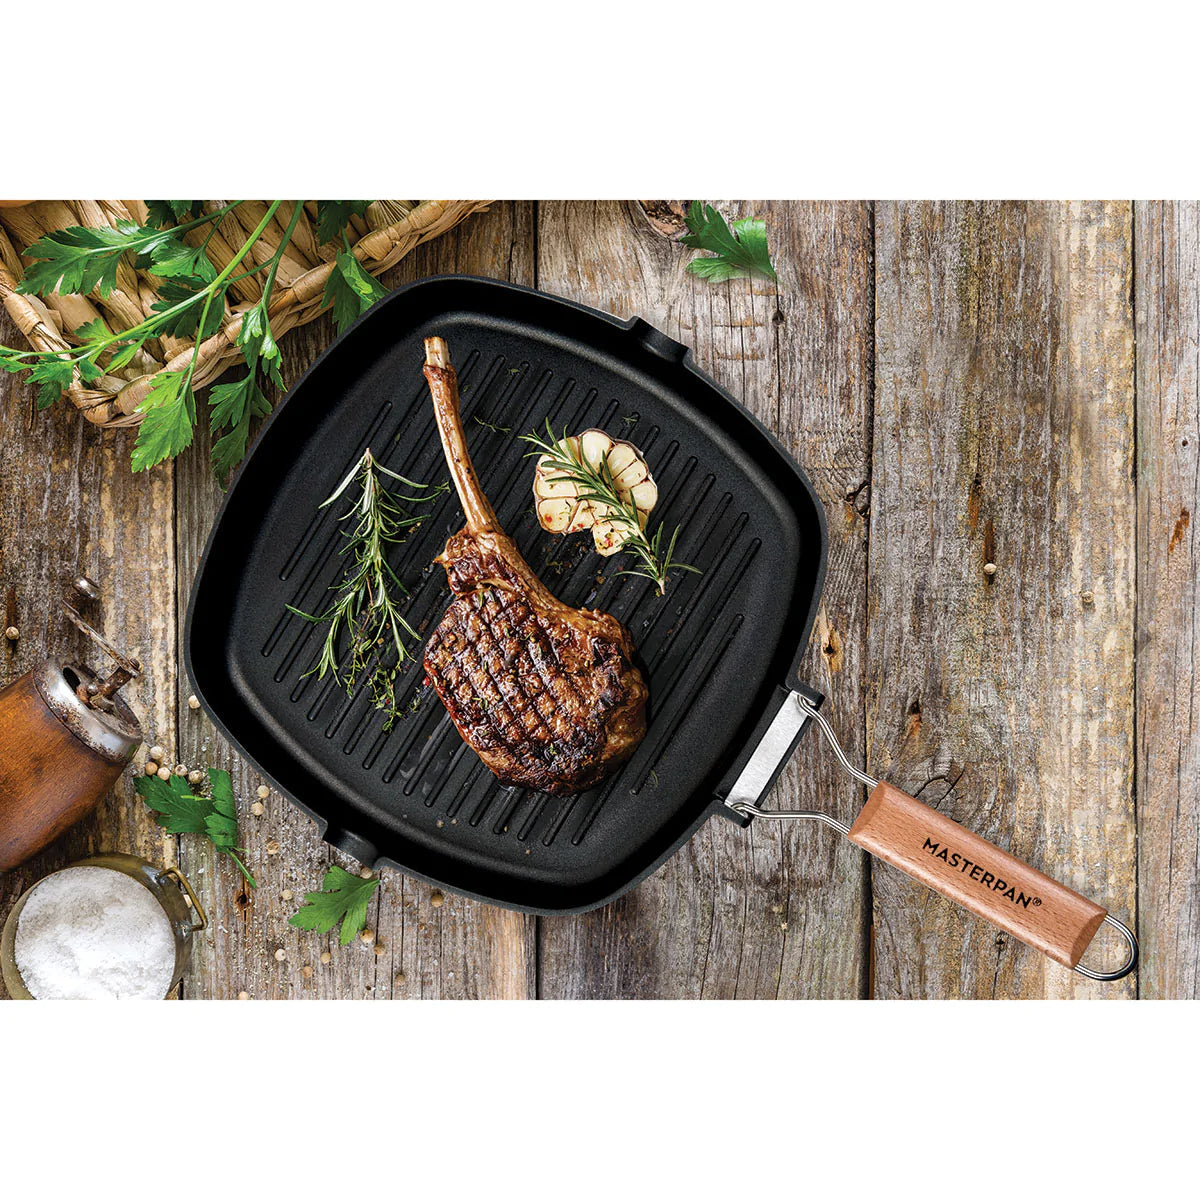 MASTERPAN Classico Series 8” Grill Pan Non-stick Cast Aluminum With Folding Handle